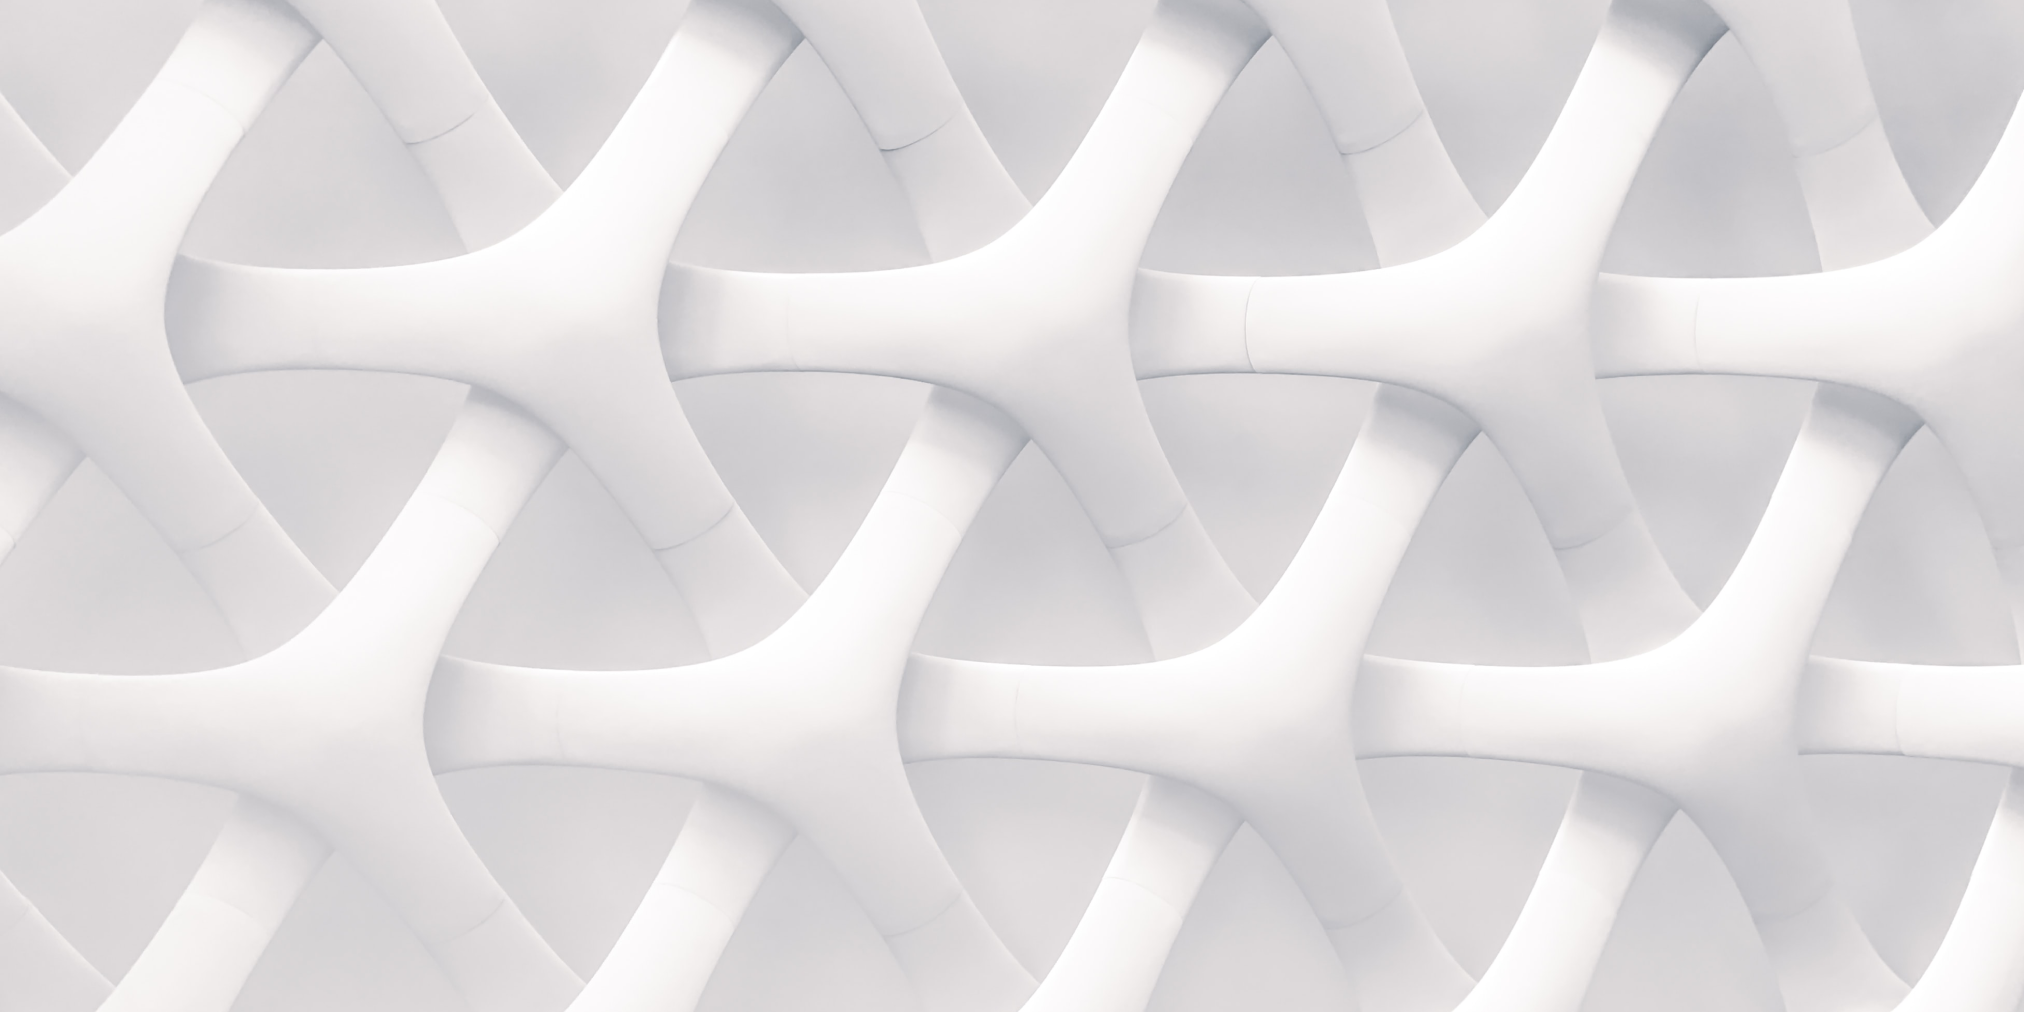 Interconnected white geometric forms